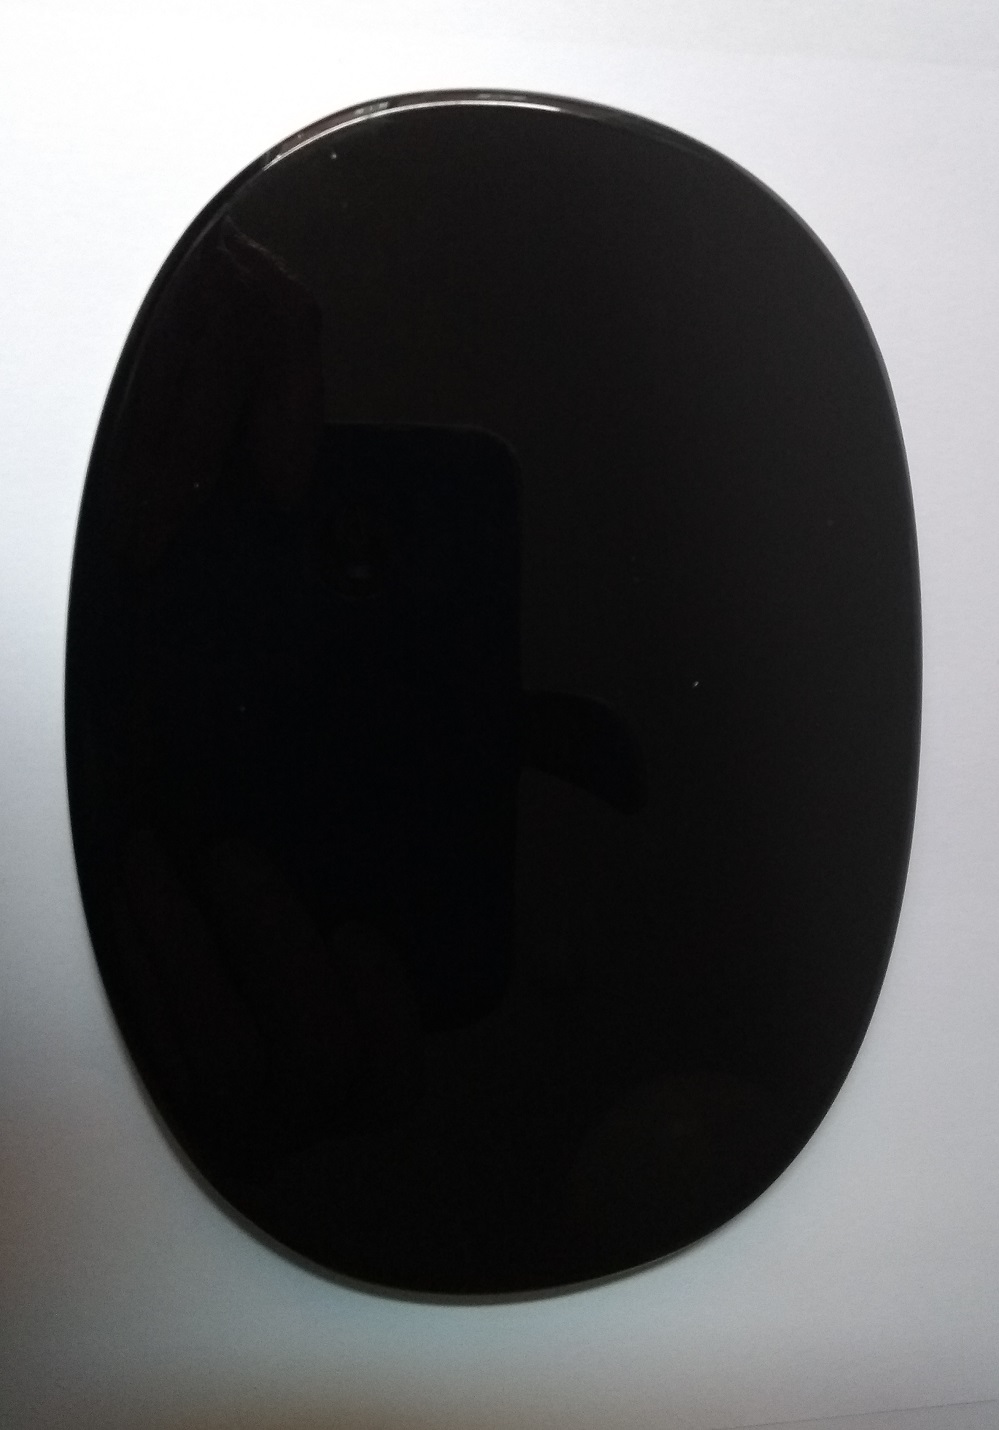 Black Obsidian Scrying Mirror (Magick Mirror) Oval 5.6 Inch by 4 Inch No 192